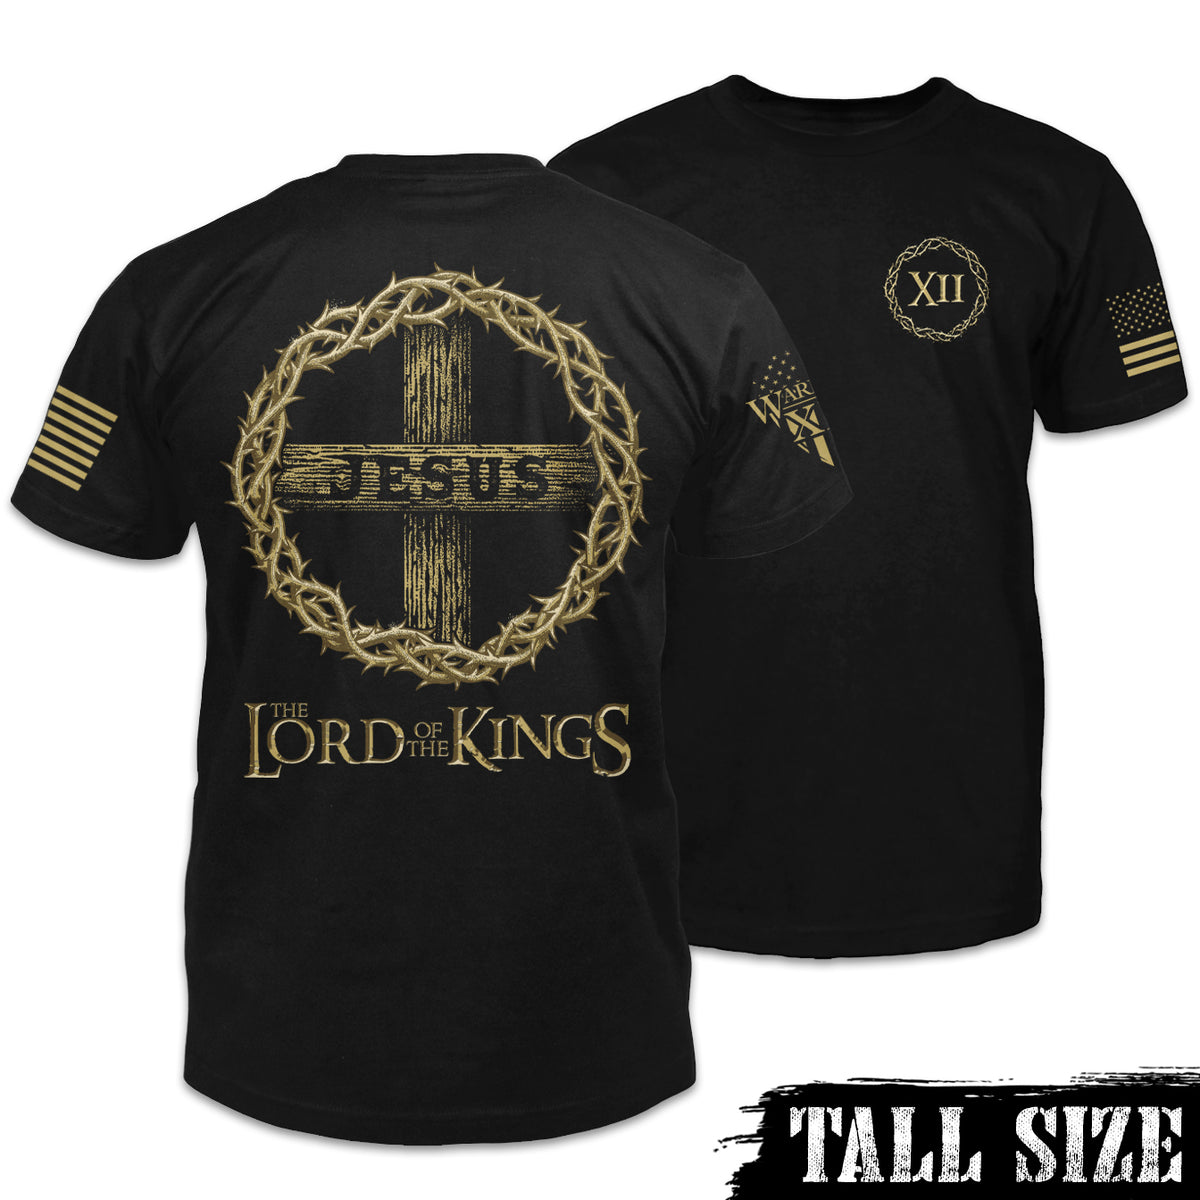 Lord of Front & back black tall size shirt with the words "Jesus - The Lord of the Kings" with a reef printed on the shirt.